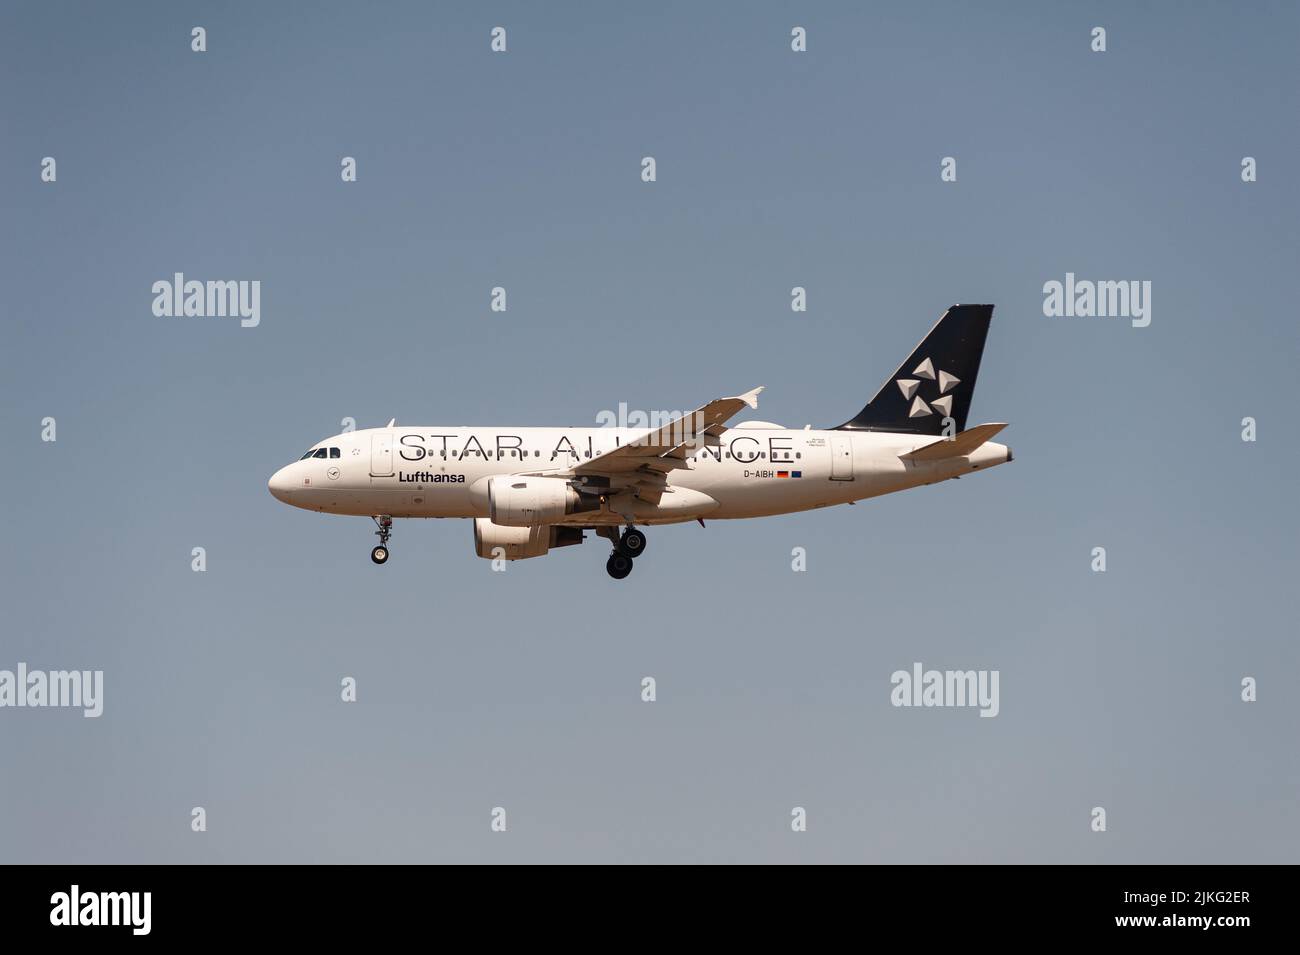 18.06.2022, Germany, Berlin, Berlin - Europe - A Lufthansa Airbus A319-100 passenger aircraft in Star Alliance livery with registration D-AIBH on appr Stock Photo